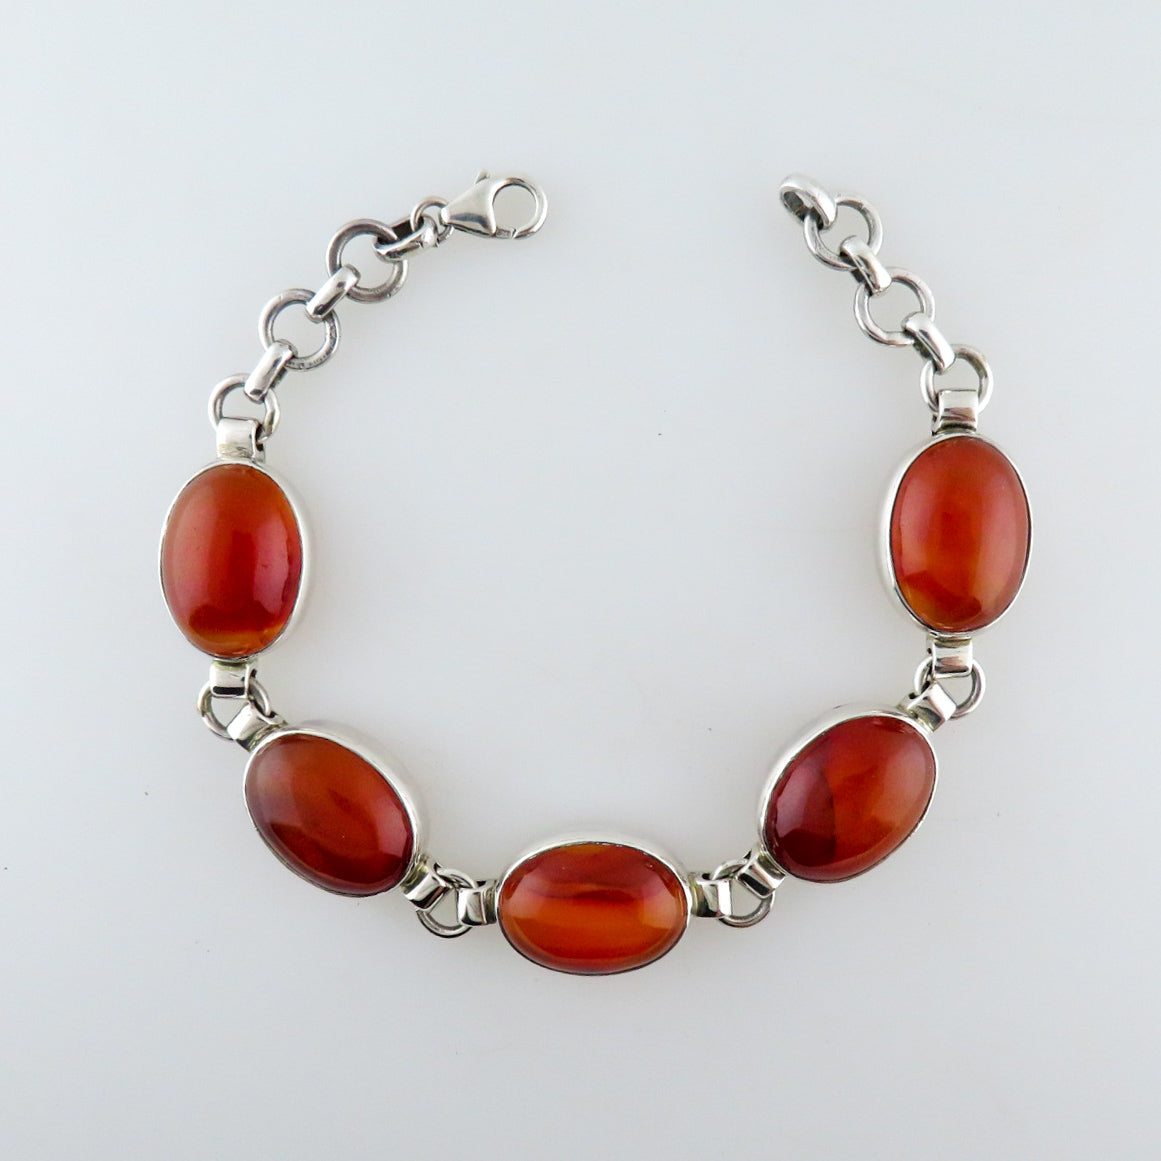 Carnelian and Sterling Silver Bracelet With Toggle Clasp-8 1/4 Inches Long.  Fits a Larger Wrist. Free Shipping. - Etsy India